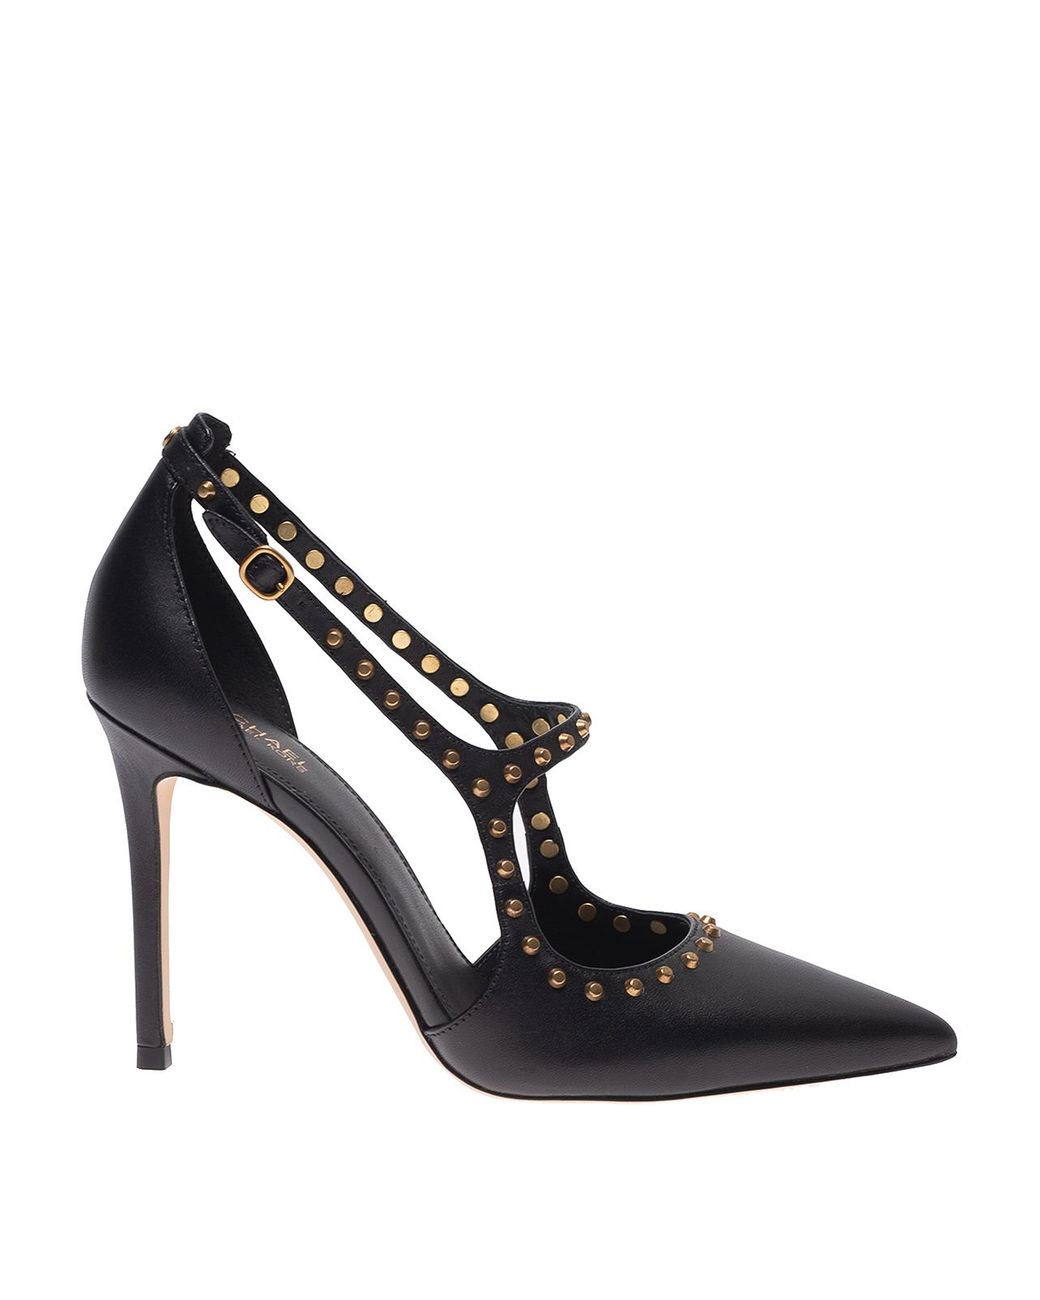 Michael Kors Ava Studded Leather Pumps in Black - Lyst